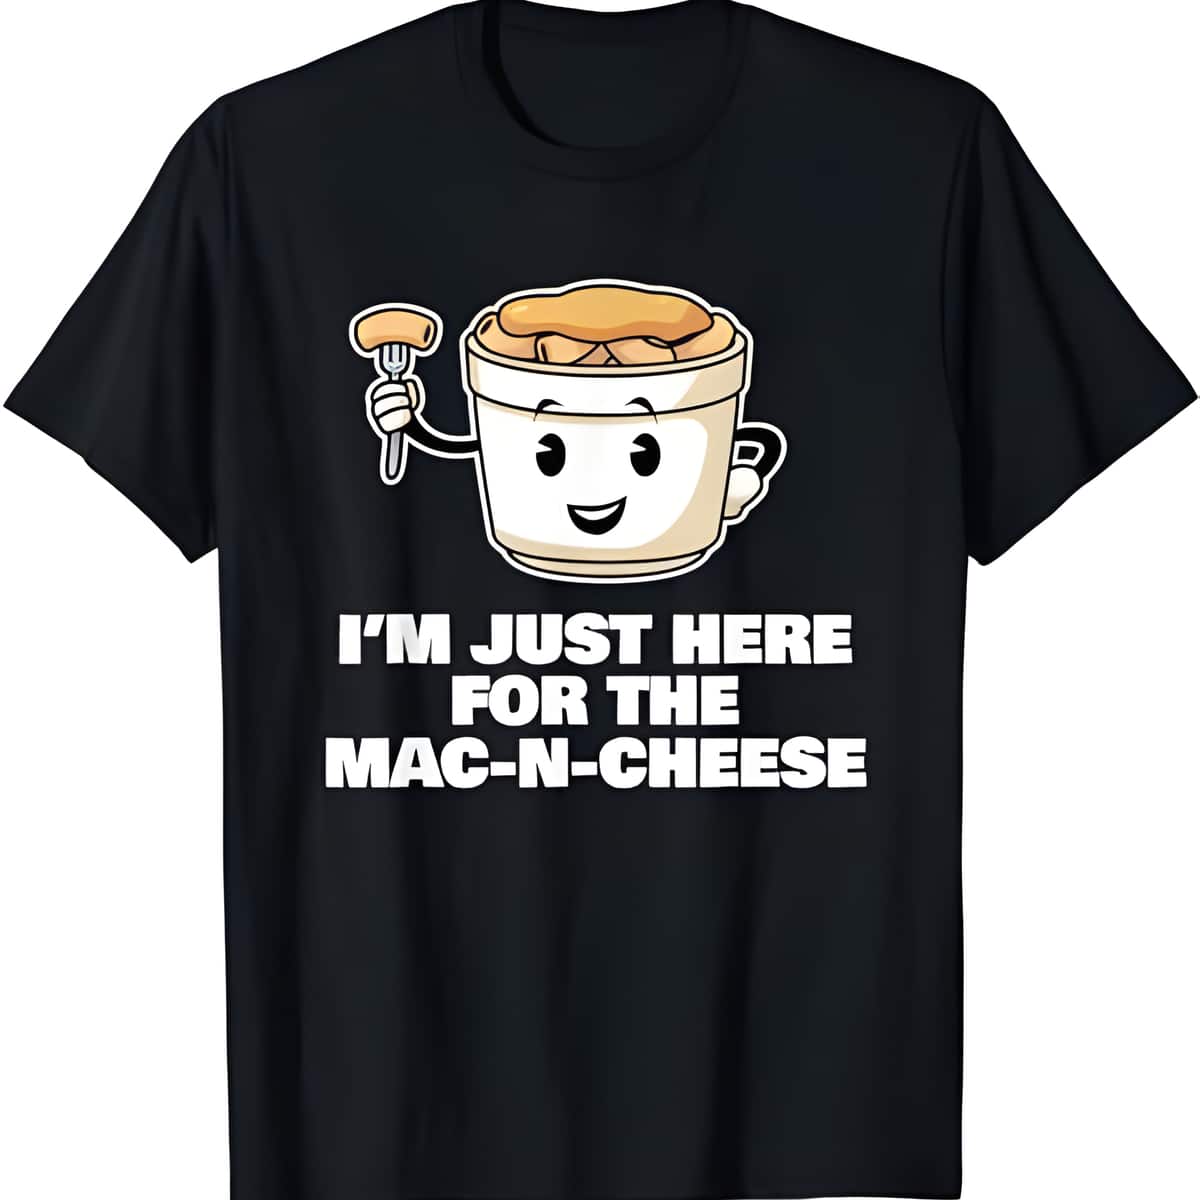 I'm Just Here For The Mac-N-Cheese T-Shirt